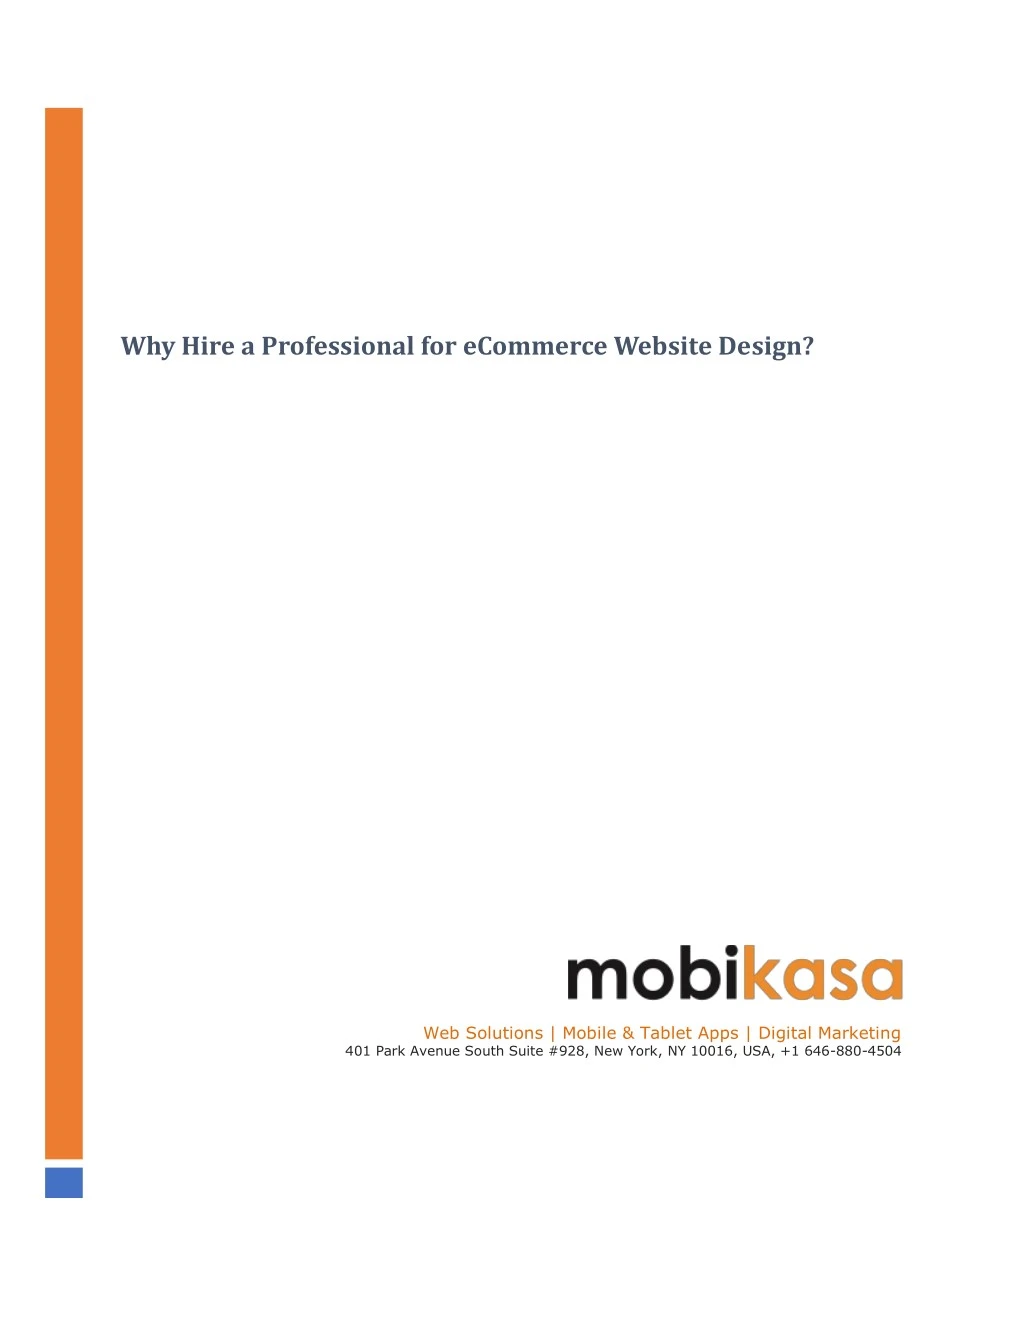 why hire a professional for ecommerce website